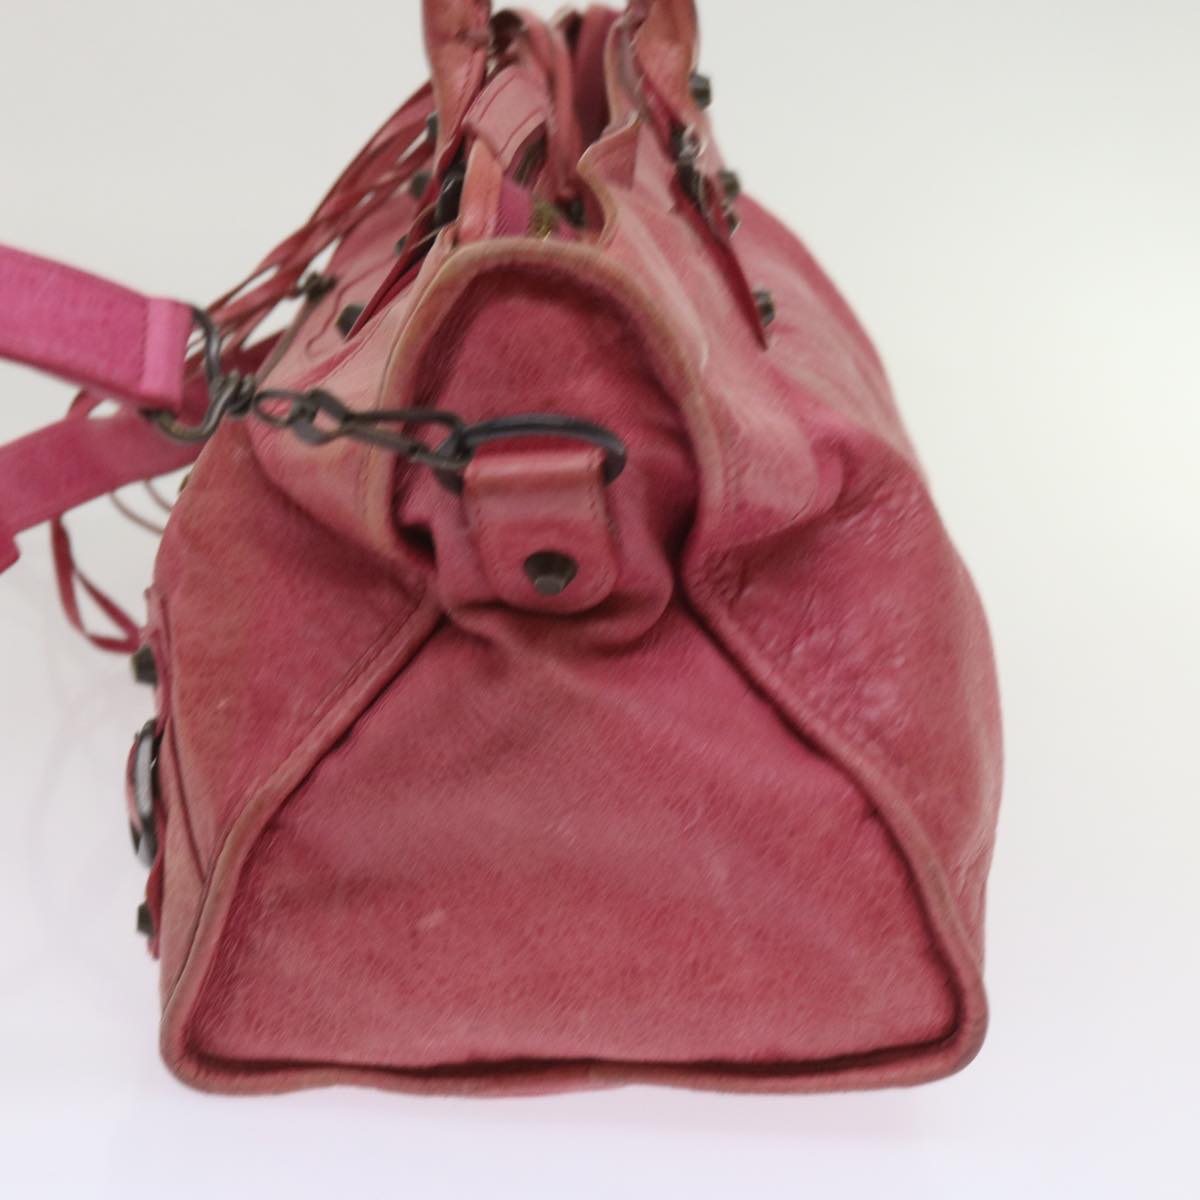 BALENCIAGA The Part Time Hand Bag Leather 2way Pink 168028 Auth 65949